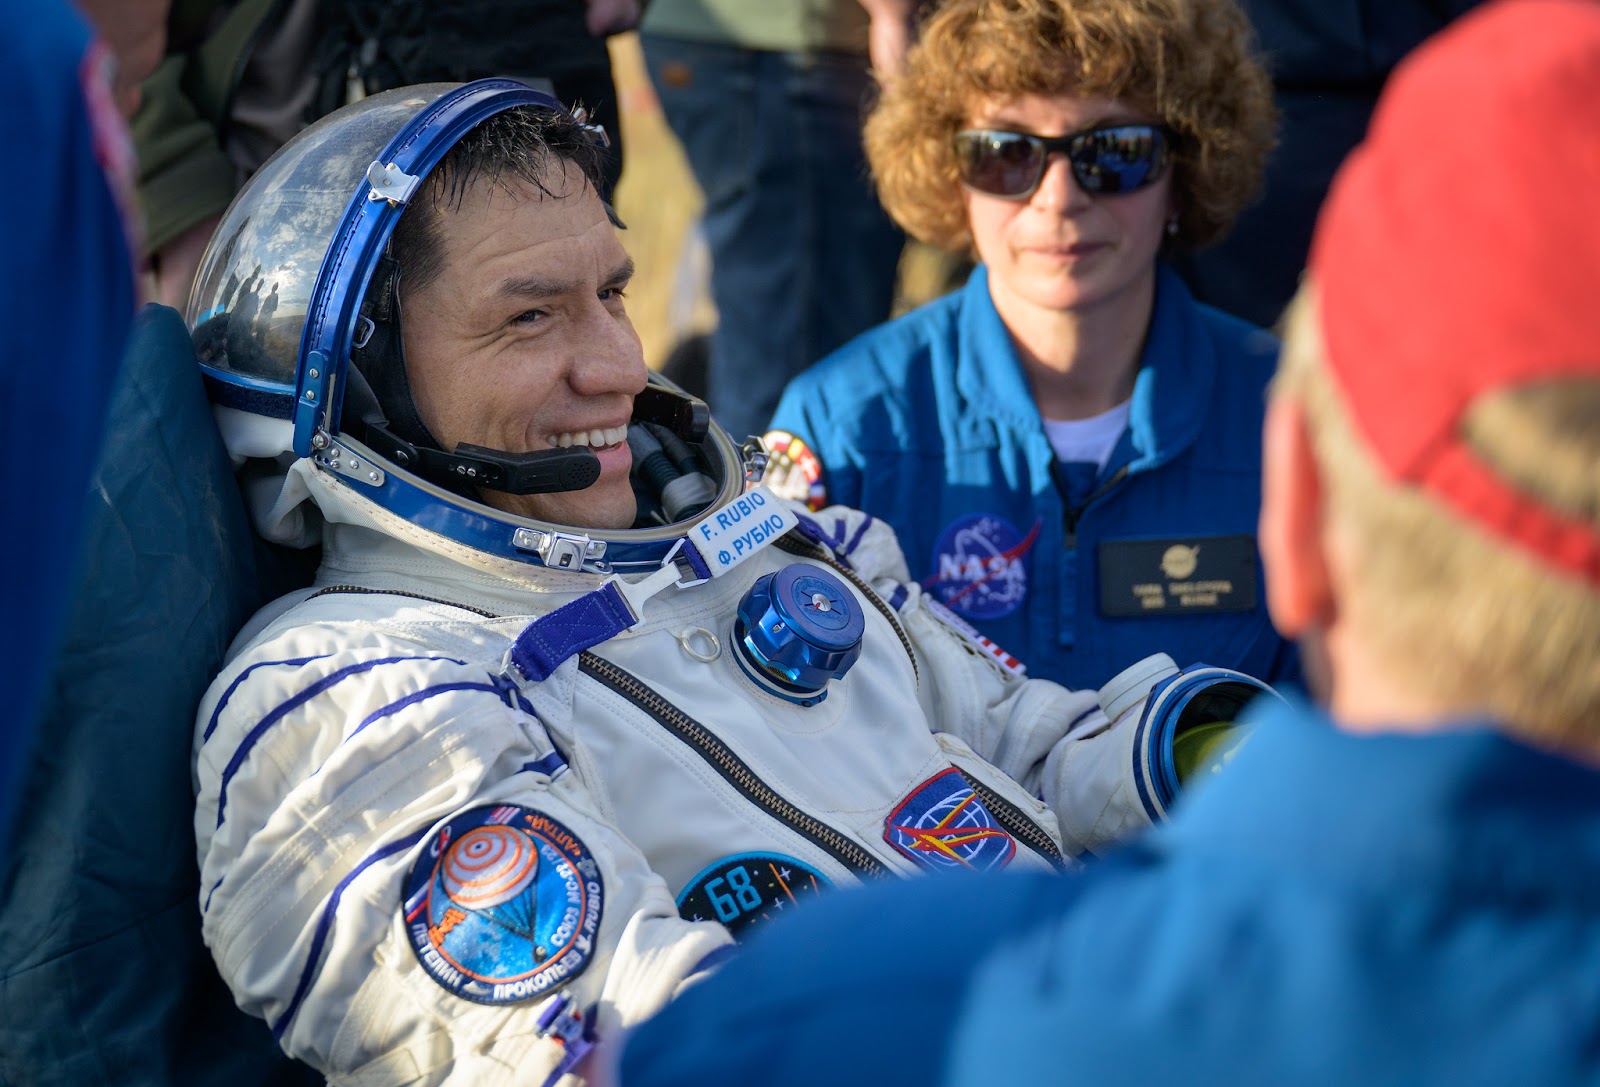 NASA astronaut Frank Rubio moments after leaving the Soyuz capsule that brought him home to Earth